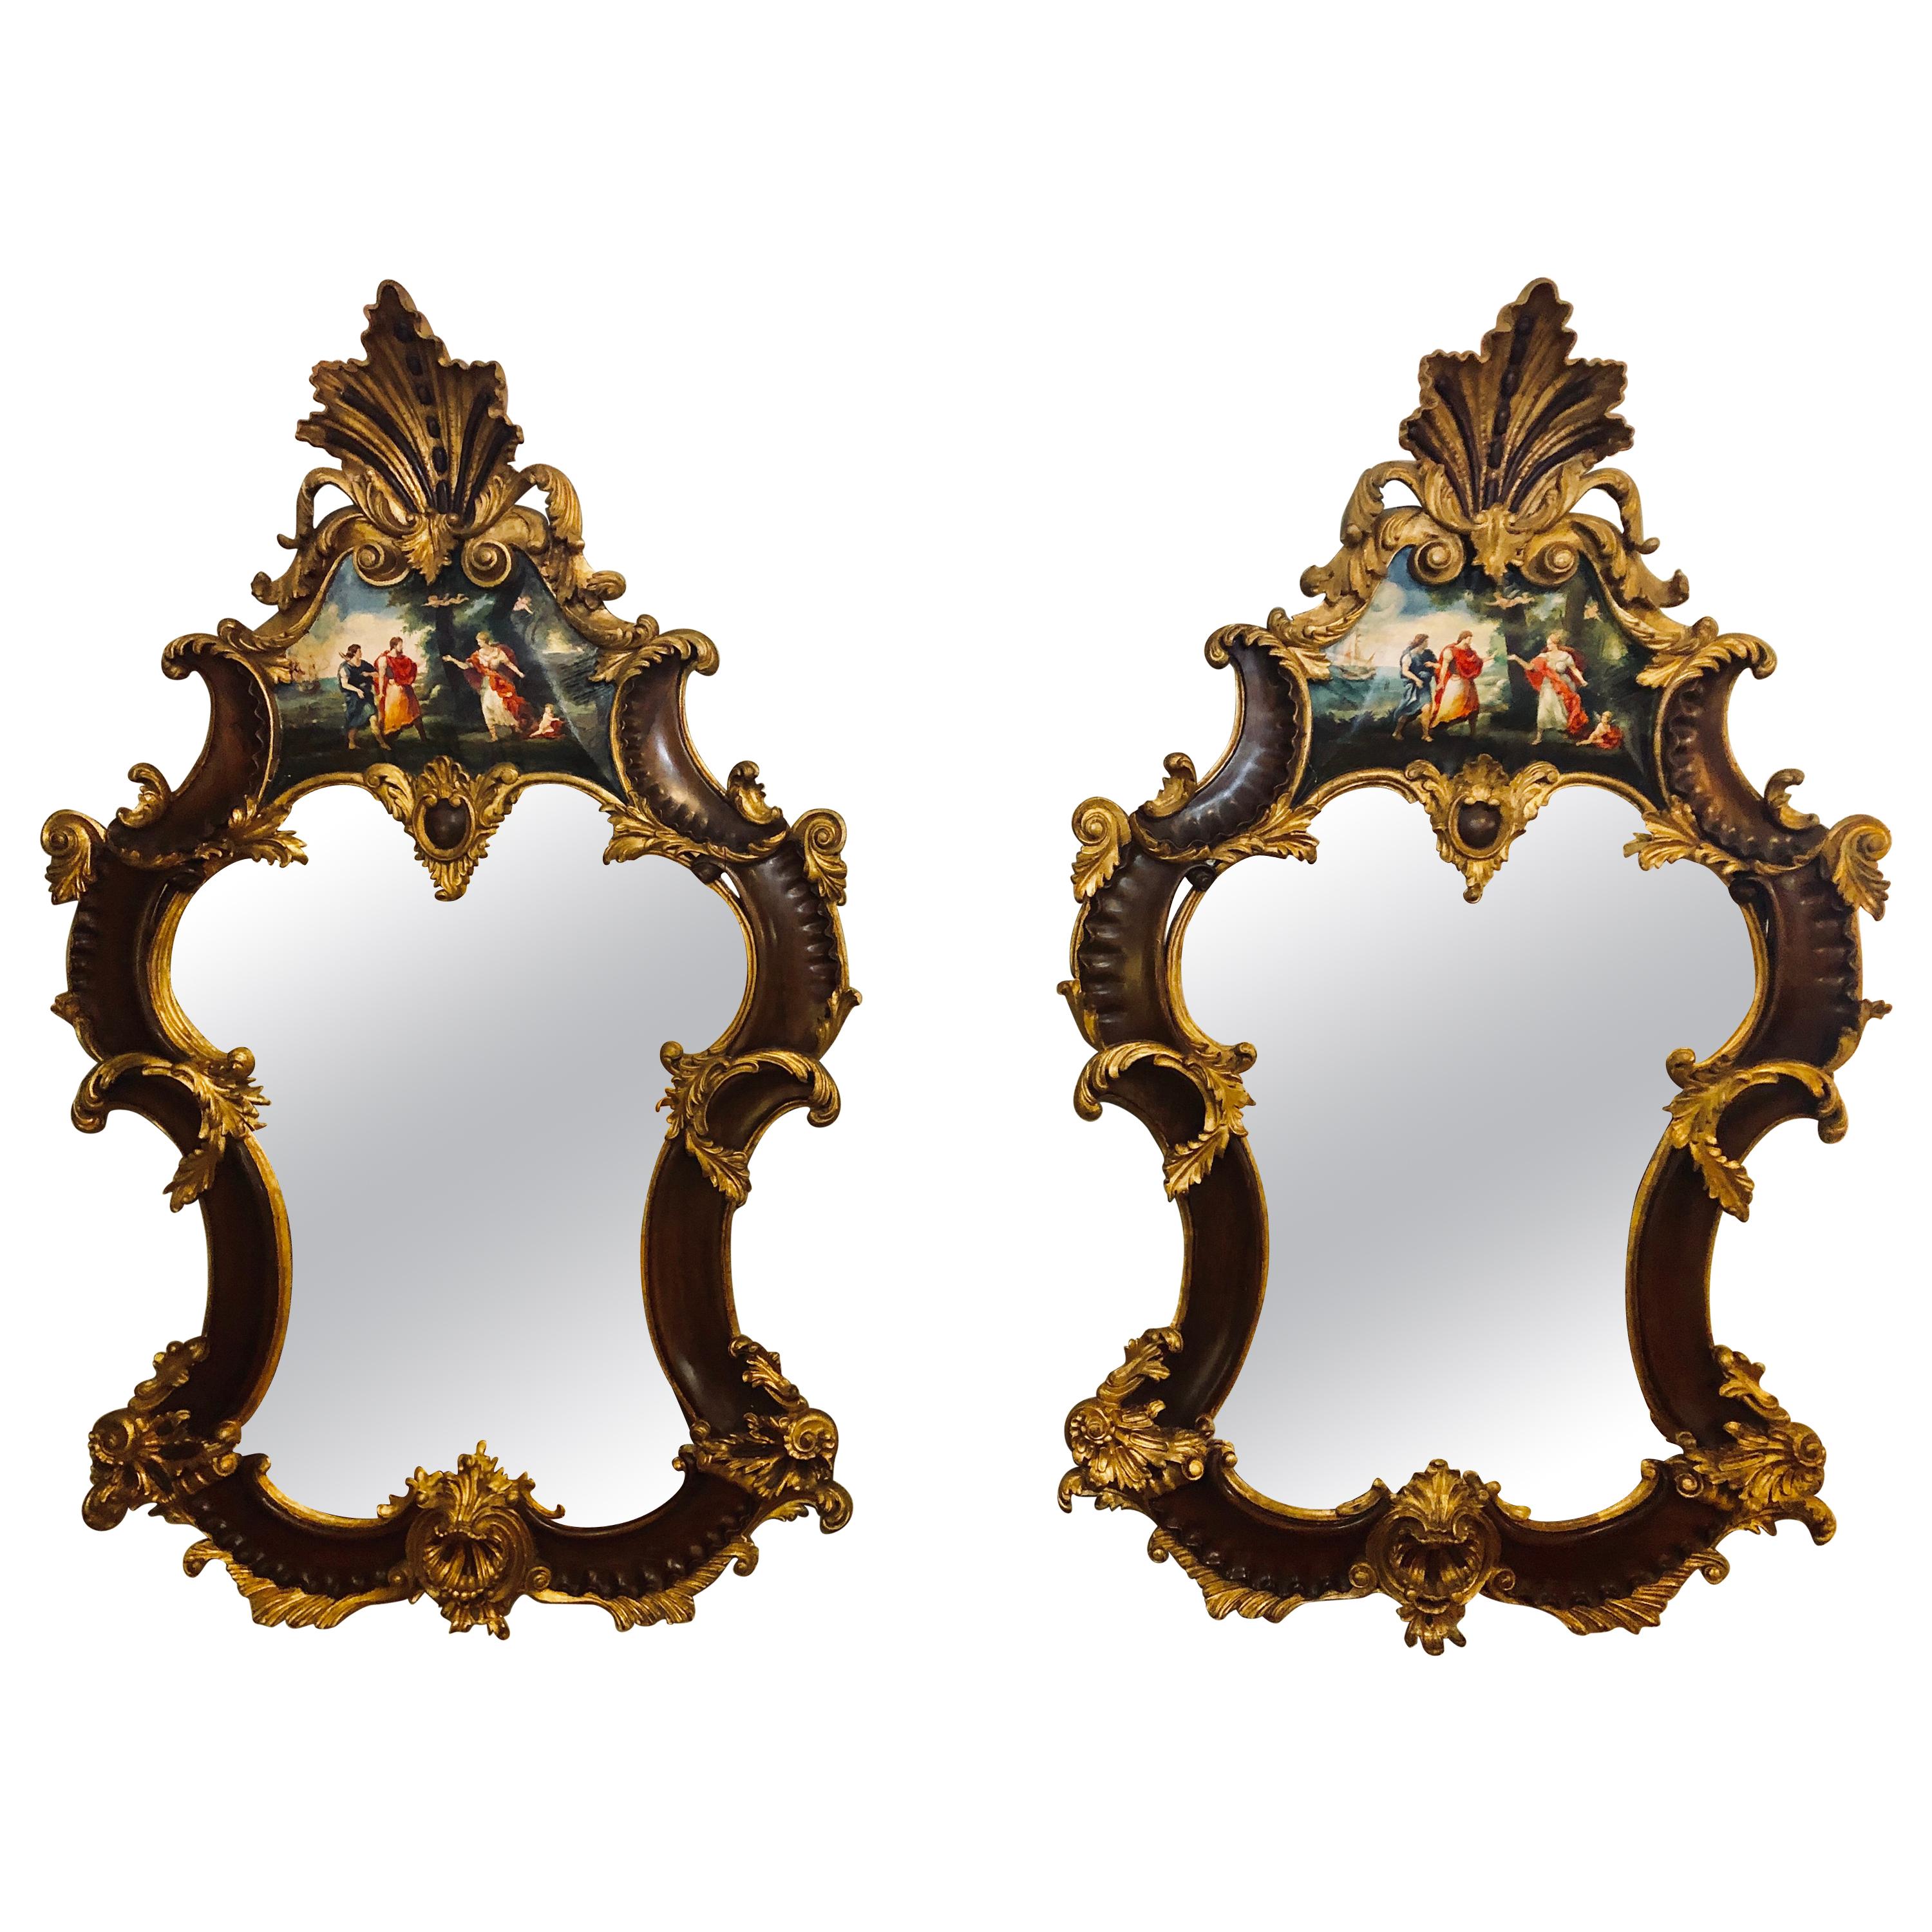 Pair of Rococo Mahogany Gilt Decorated Carved Wall / Pier or Console Mirrors